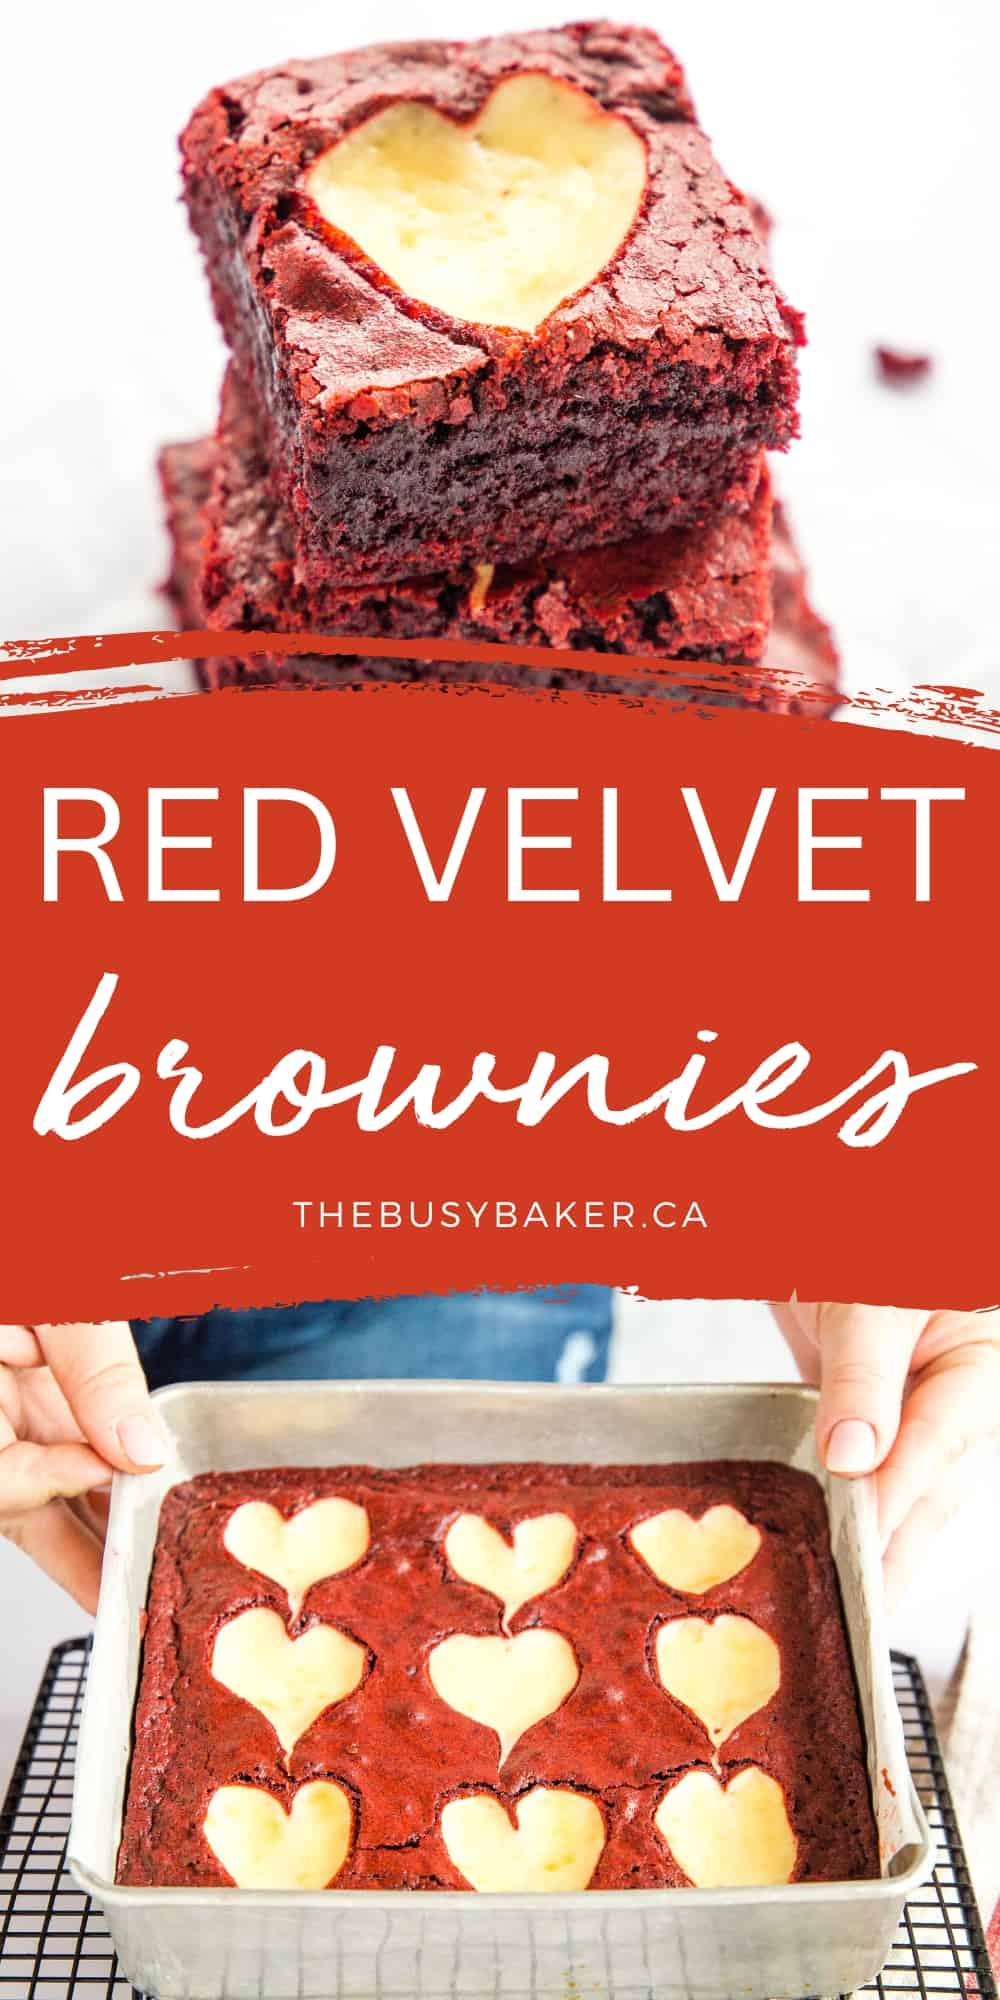 These Red Velvet Brownies are the perfect simple Valentine's Day dessert - moist, fudgey, rich and chocolatey, with an easy cheesecake topping! Recipe from thebusybaker.ca! #redvelvetbrownies #redvelvet #brownies #valentinesdaydessert #dessert #treat #sweet #homemade #baking #browniesrecipe #cheesecakebrownies #heartbrownies #heartshapeddessert via @busybakerblog